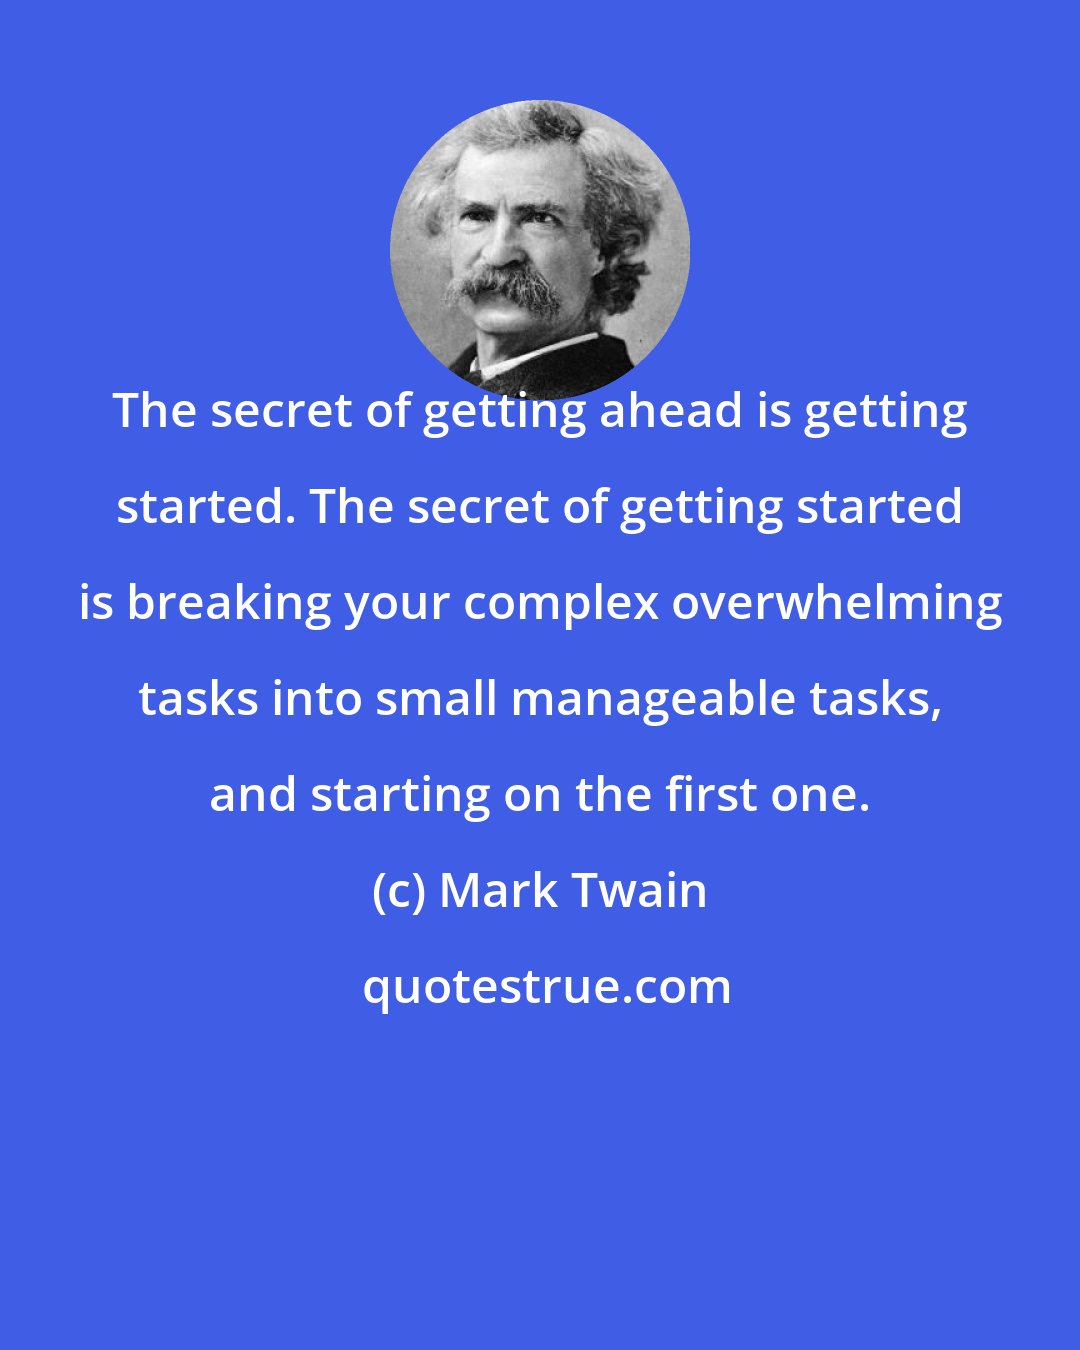 Mark Twain: The secret of getting ahead is getting started. The secret of getting started is breaking your complex overwhelming tasks into small manageable tasks, and starting on the first one.